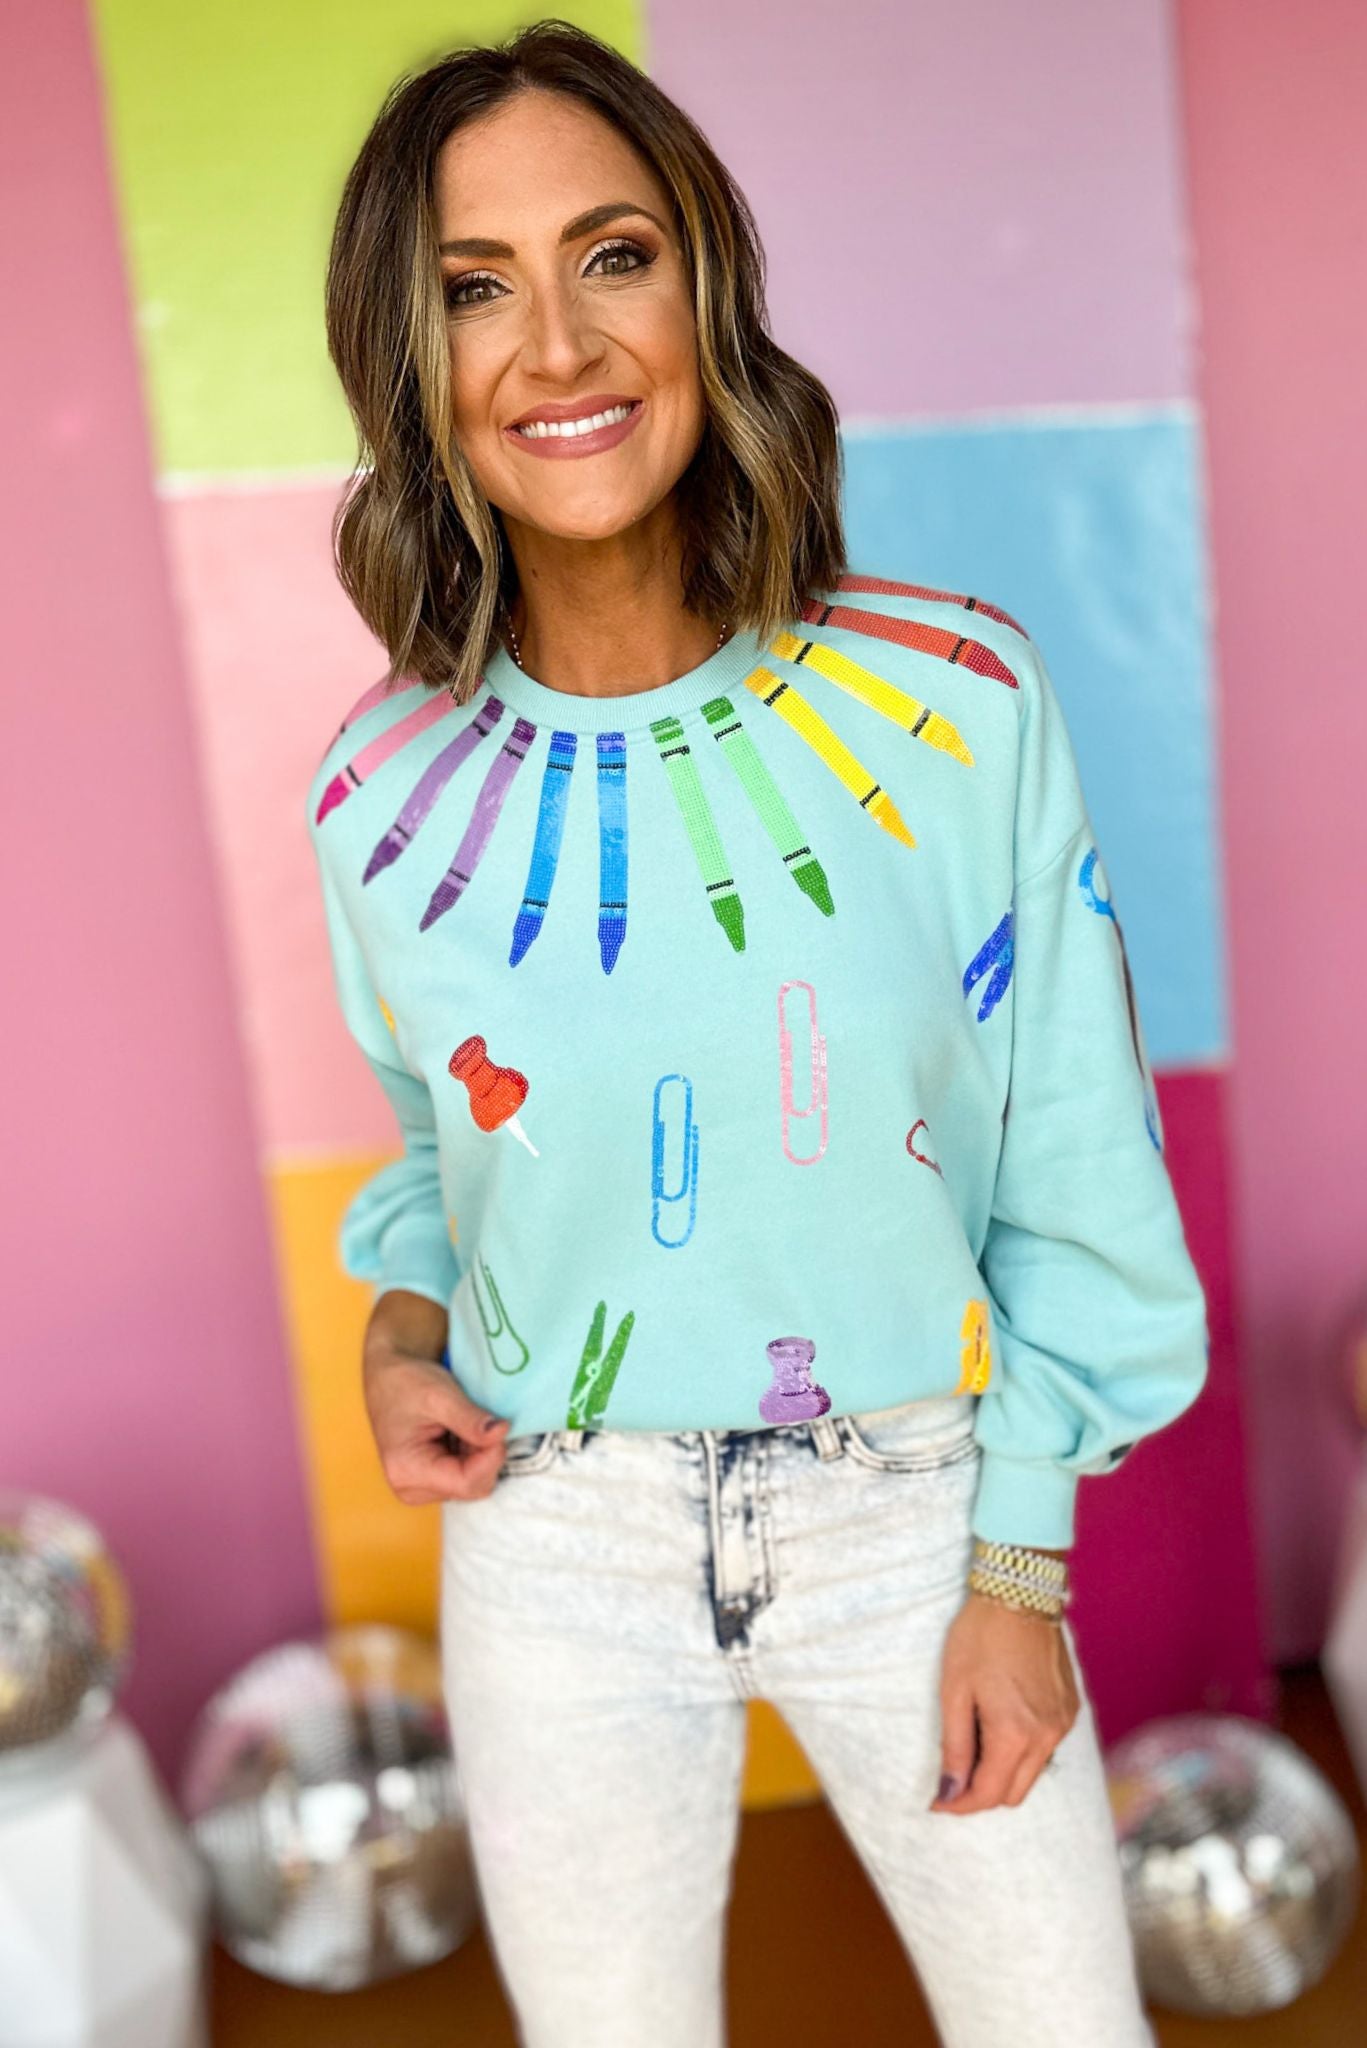 Queen Of Sparkles Mint School Supplies Sweatshirt, , must have sweatshirt, must have style, must have sparkle, QOS, Queen of sparkles, fall fashion, elevated fall, elevated style, mom style, shop style your senses by mallory fitzsimmons